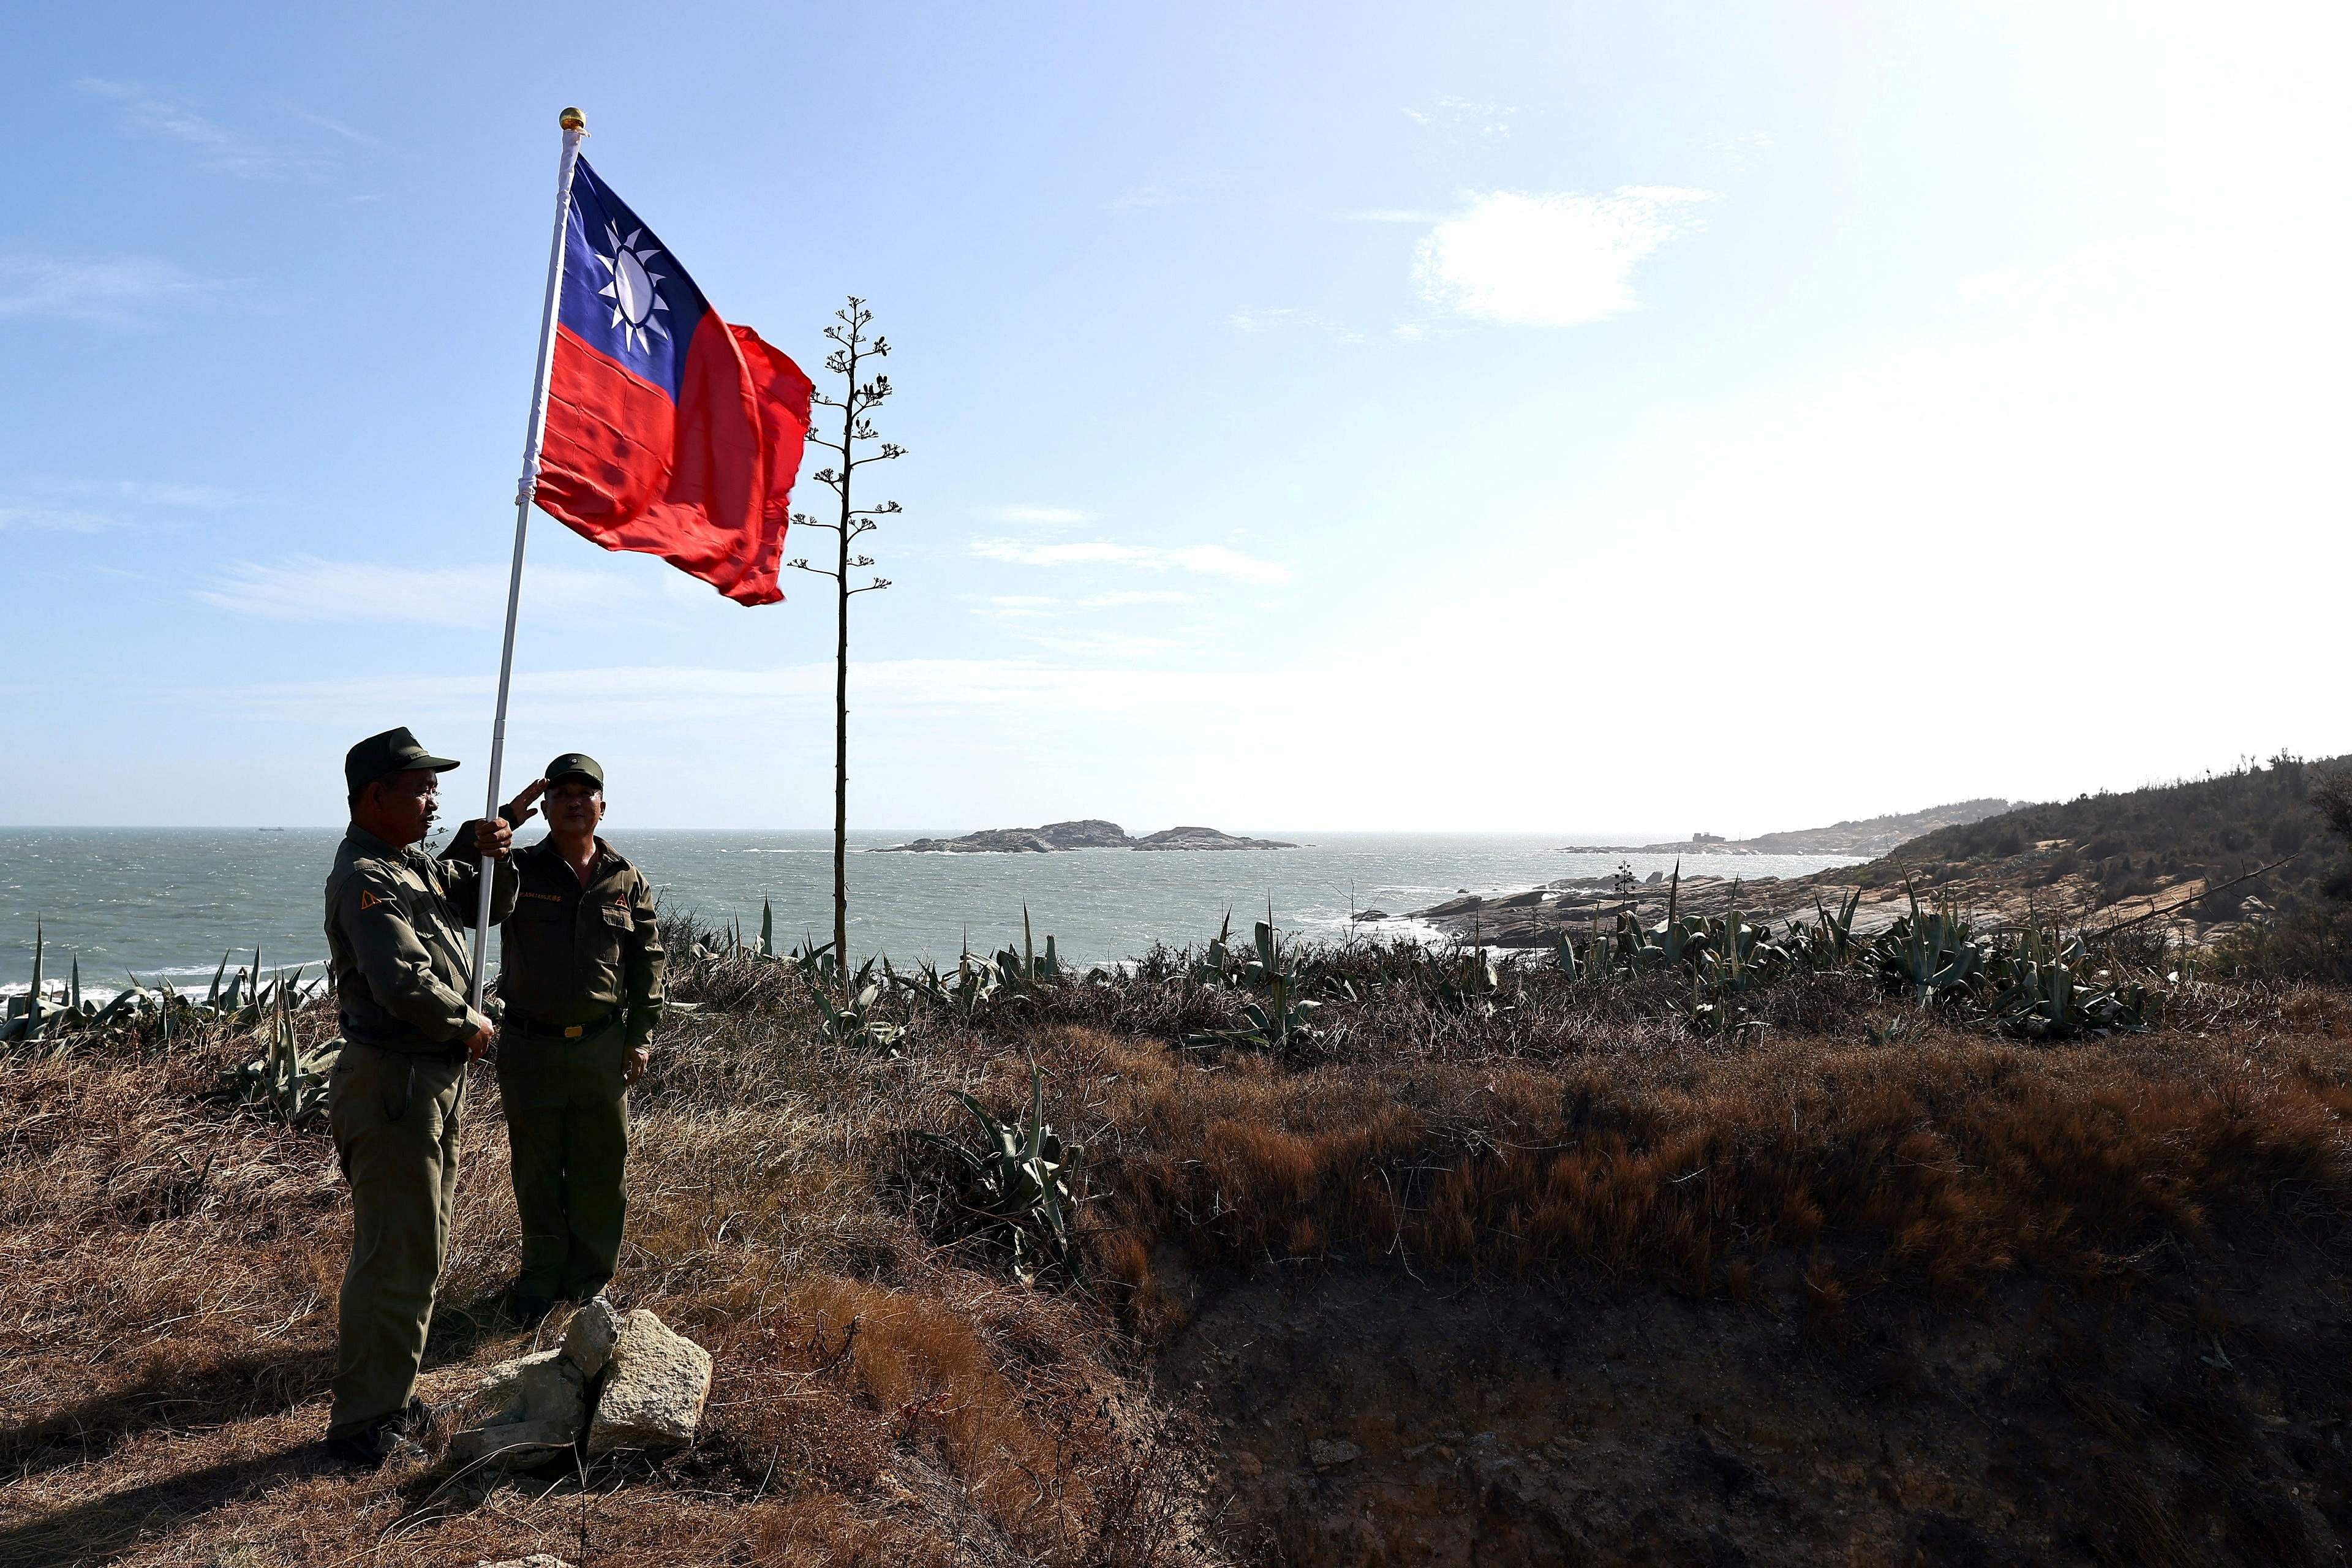 Veterans take part in a flag raising ceremony at a former military post on Kinmen, Taiwan, October 15, 2021. Sitting on the front line between Taiwan and China, Kinmen is the last place where the two engaged in major fighting, in 1958. Credit: Reuters Photo